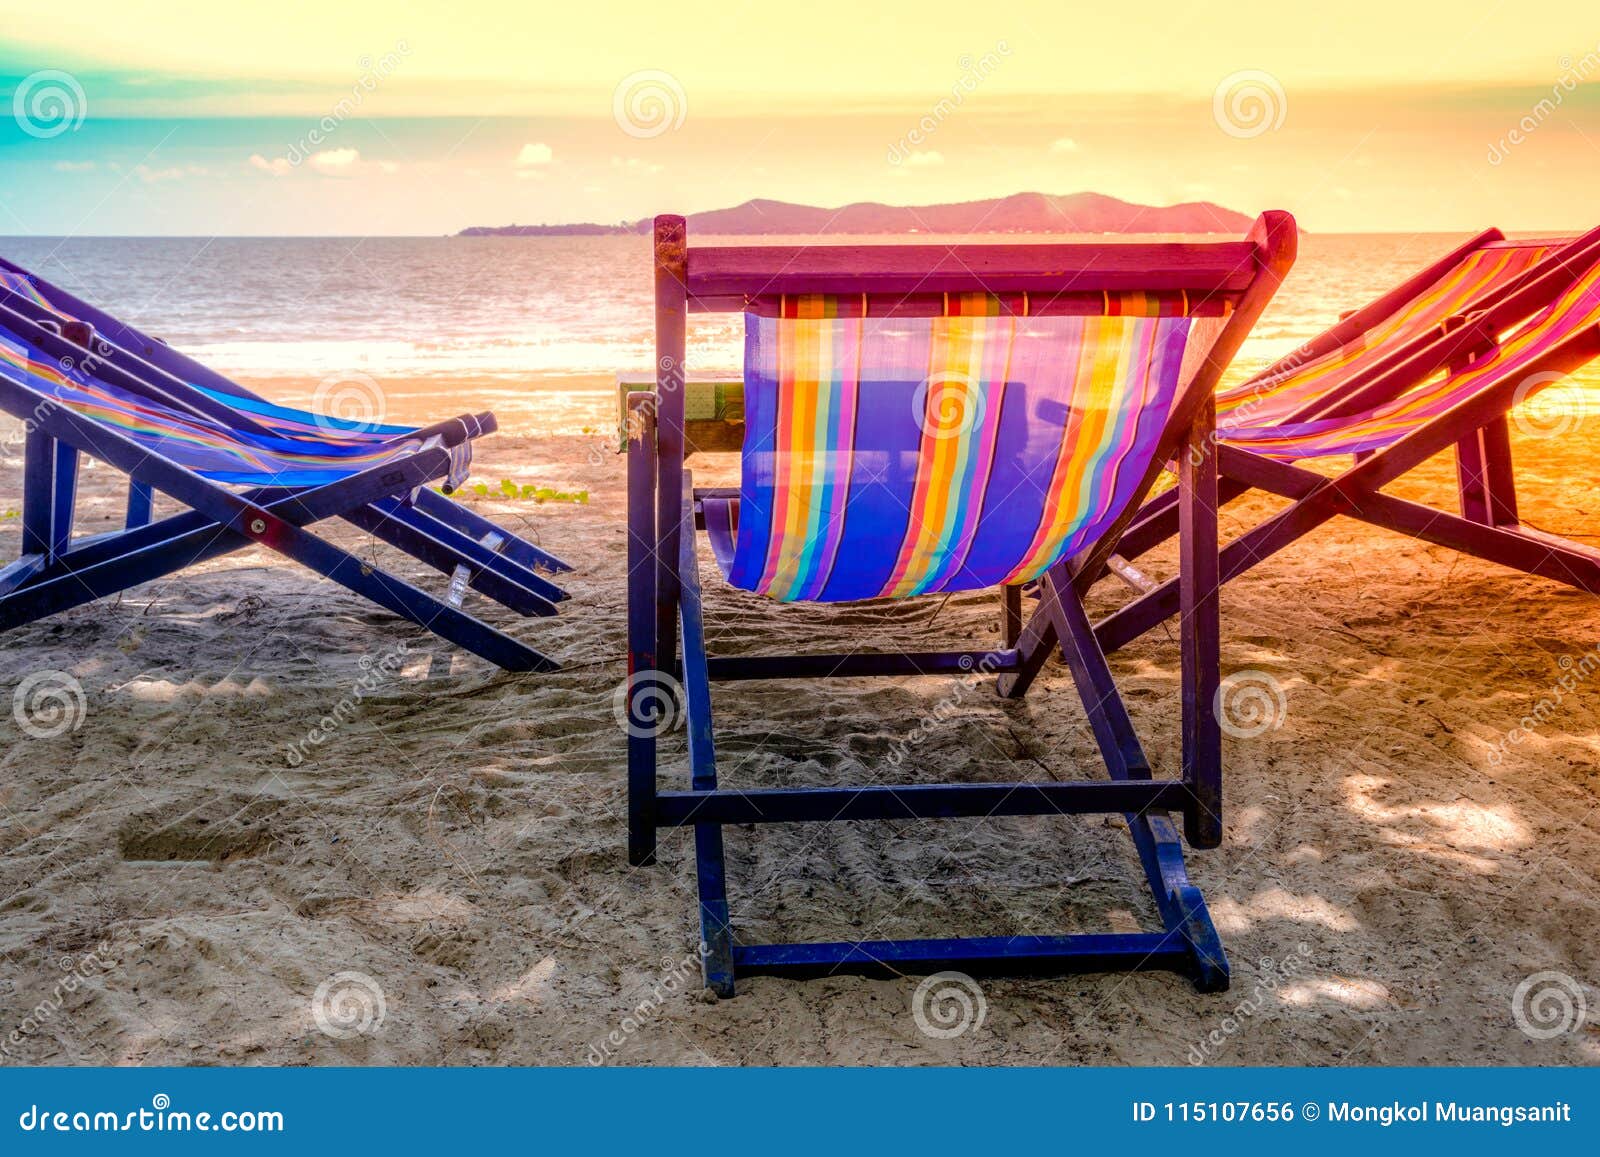 Folding Chair With Blue Color On The Beach In Sunlight With Sea 